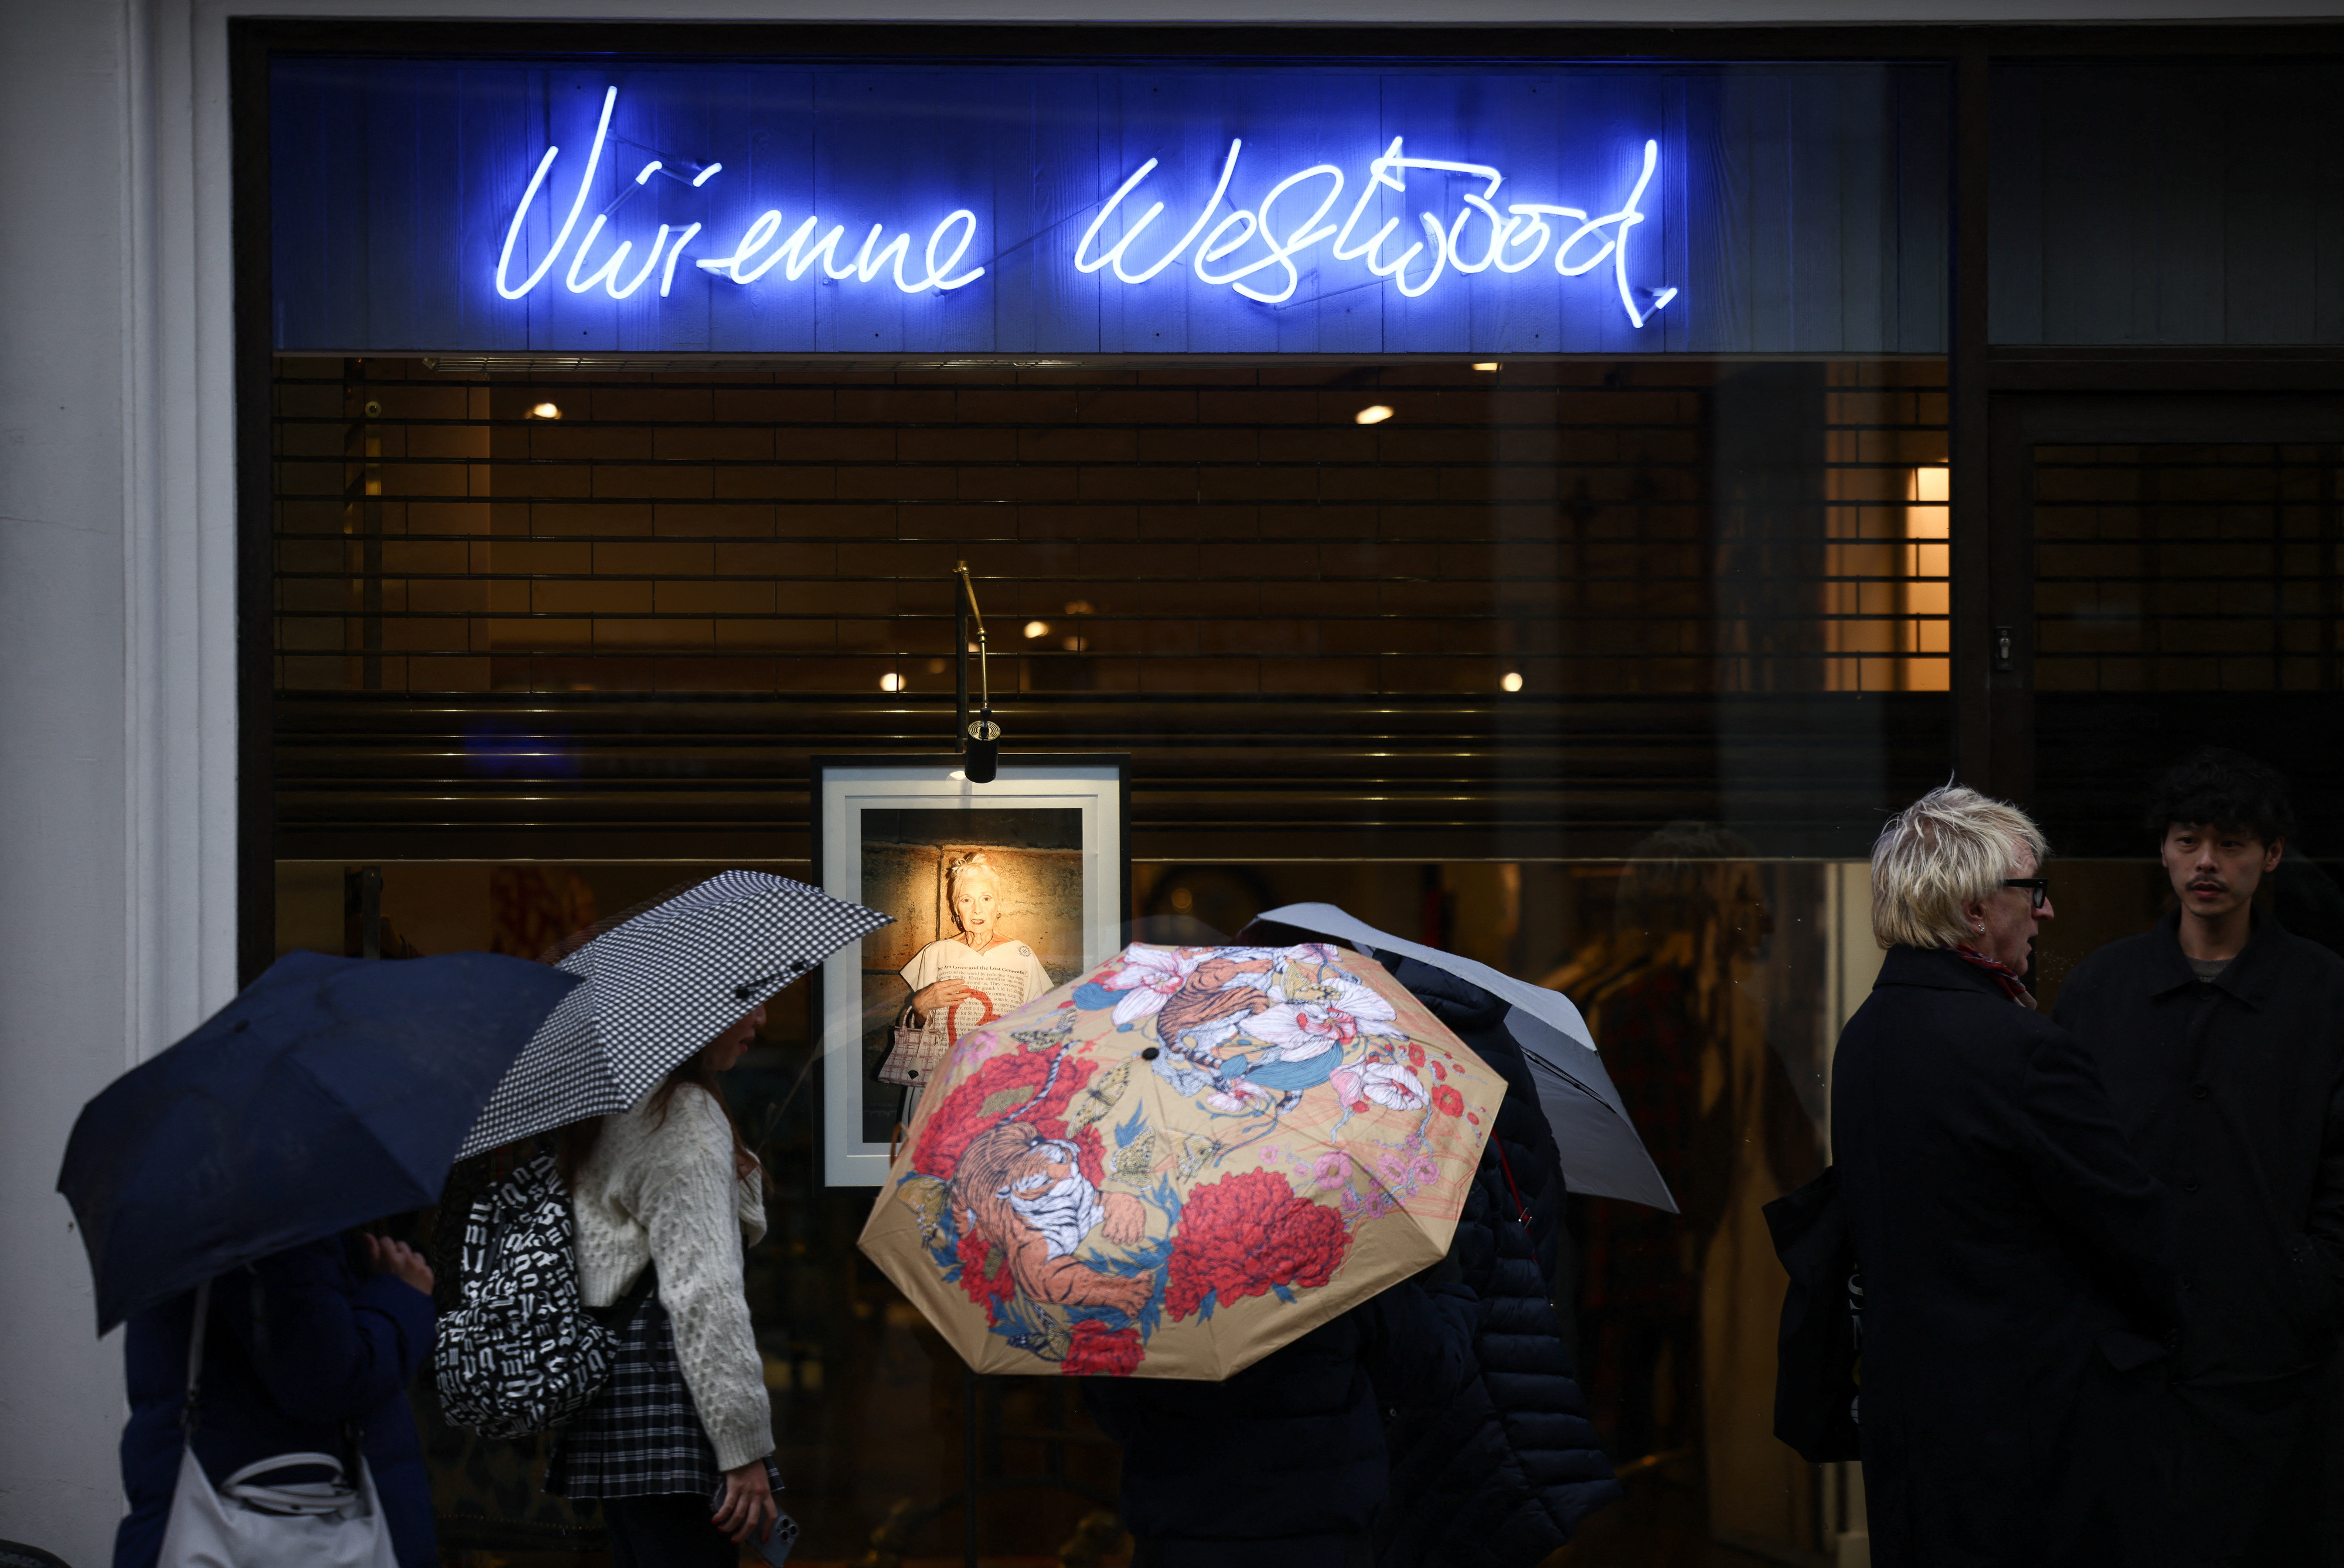 People view a eulogy and photograph displayed in the window of a Vivienne Westwood store in Mayfair, London on Friday. Reuters/Henry Nicholls